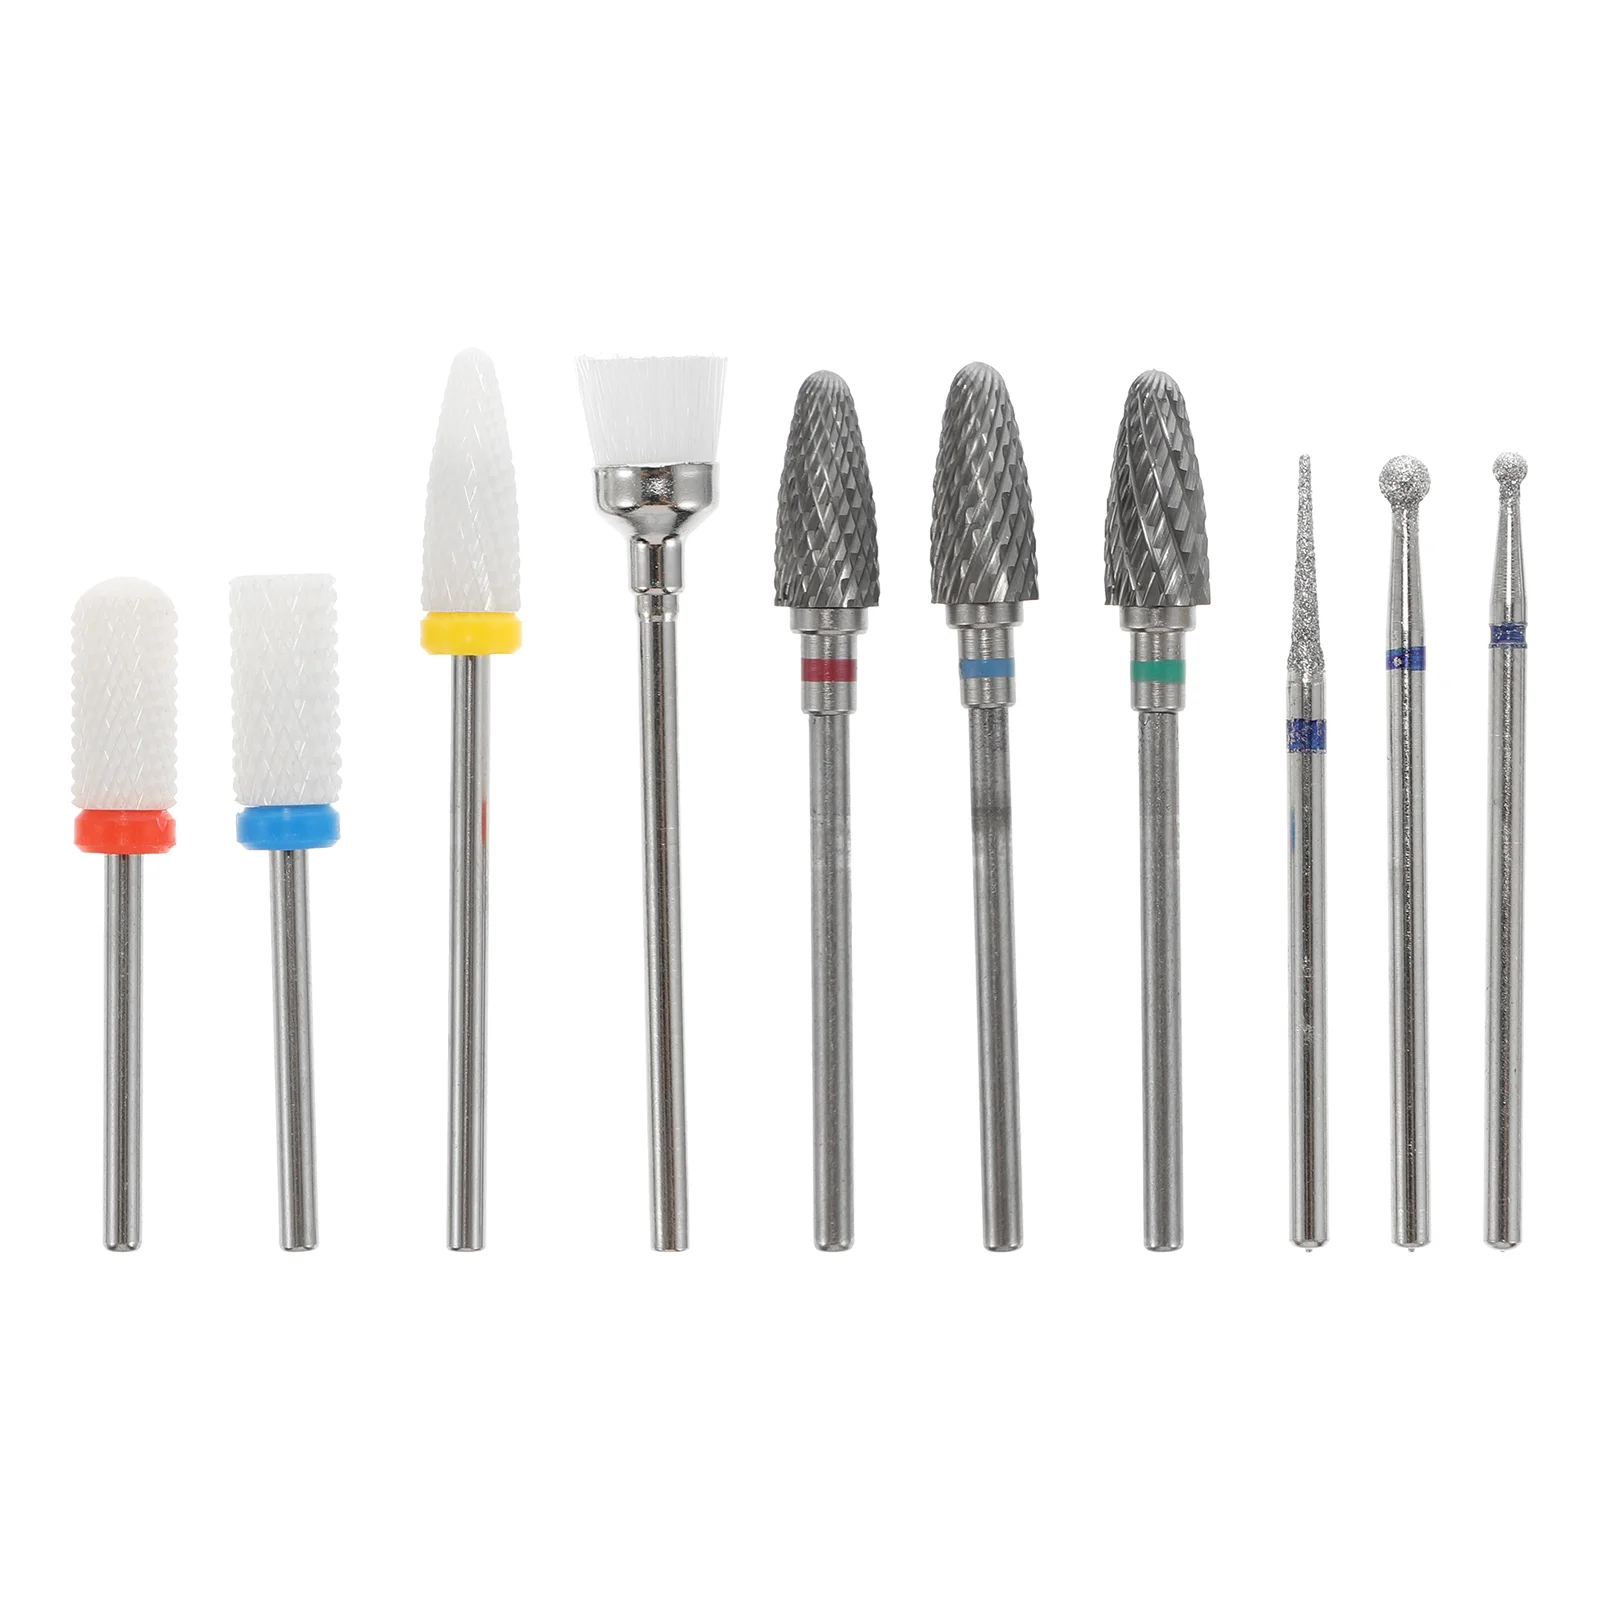 

10 Pcs Grinding Head Set Cleaning Tools Manicure Nail Heads Accessories Drill Bits Tungsten Steel Alloy